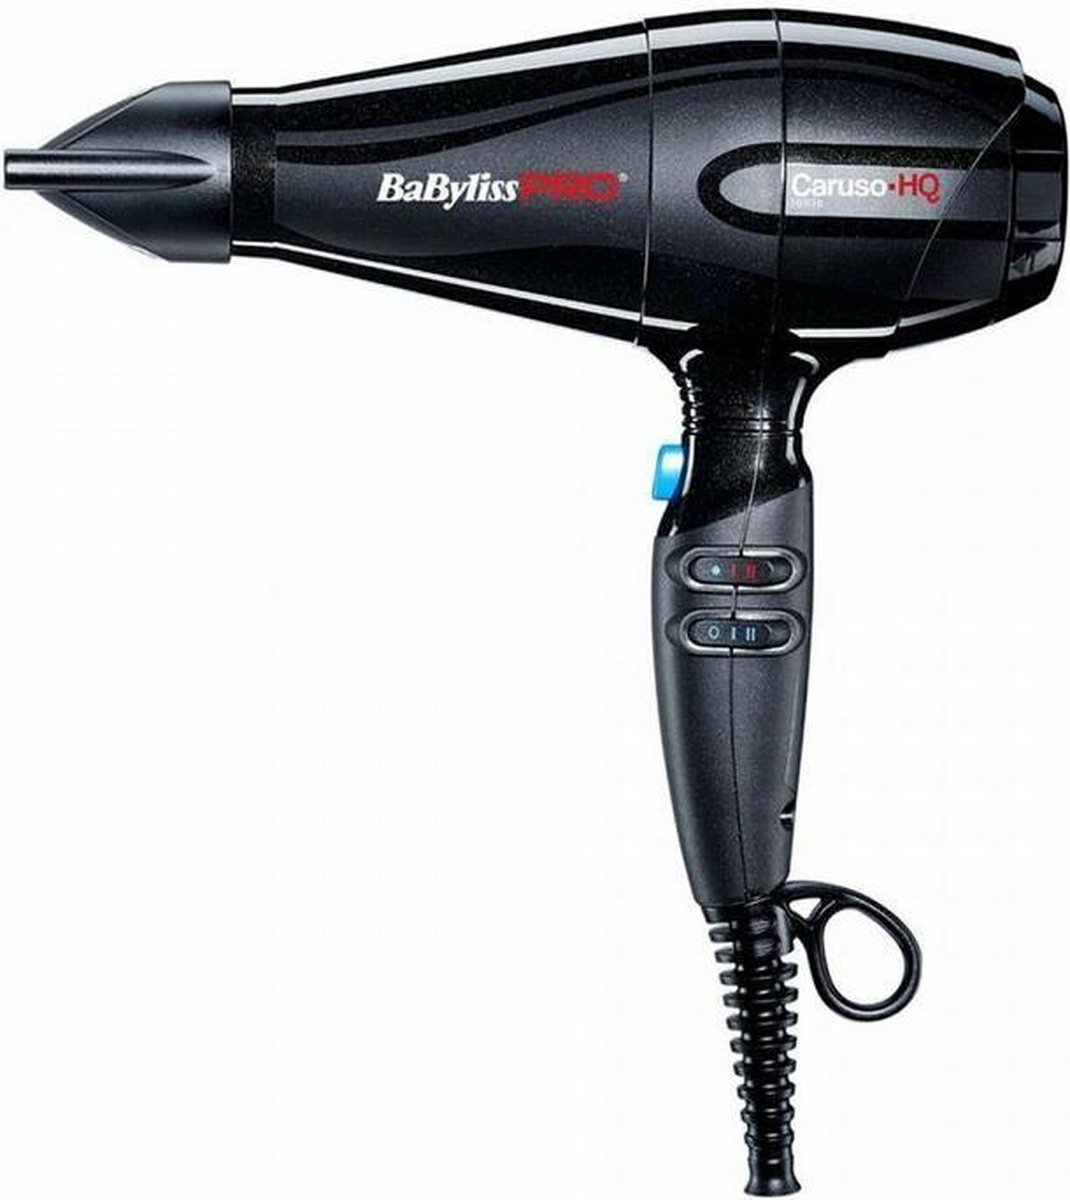 Babyliss - Pro Caruso HQ Ionic Hair Dryer 2400W